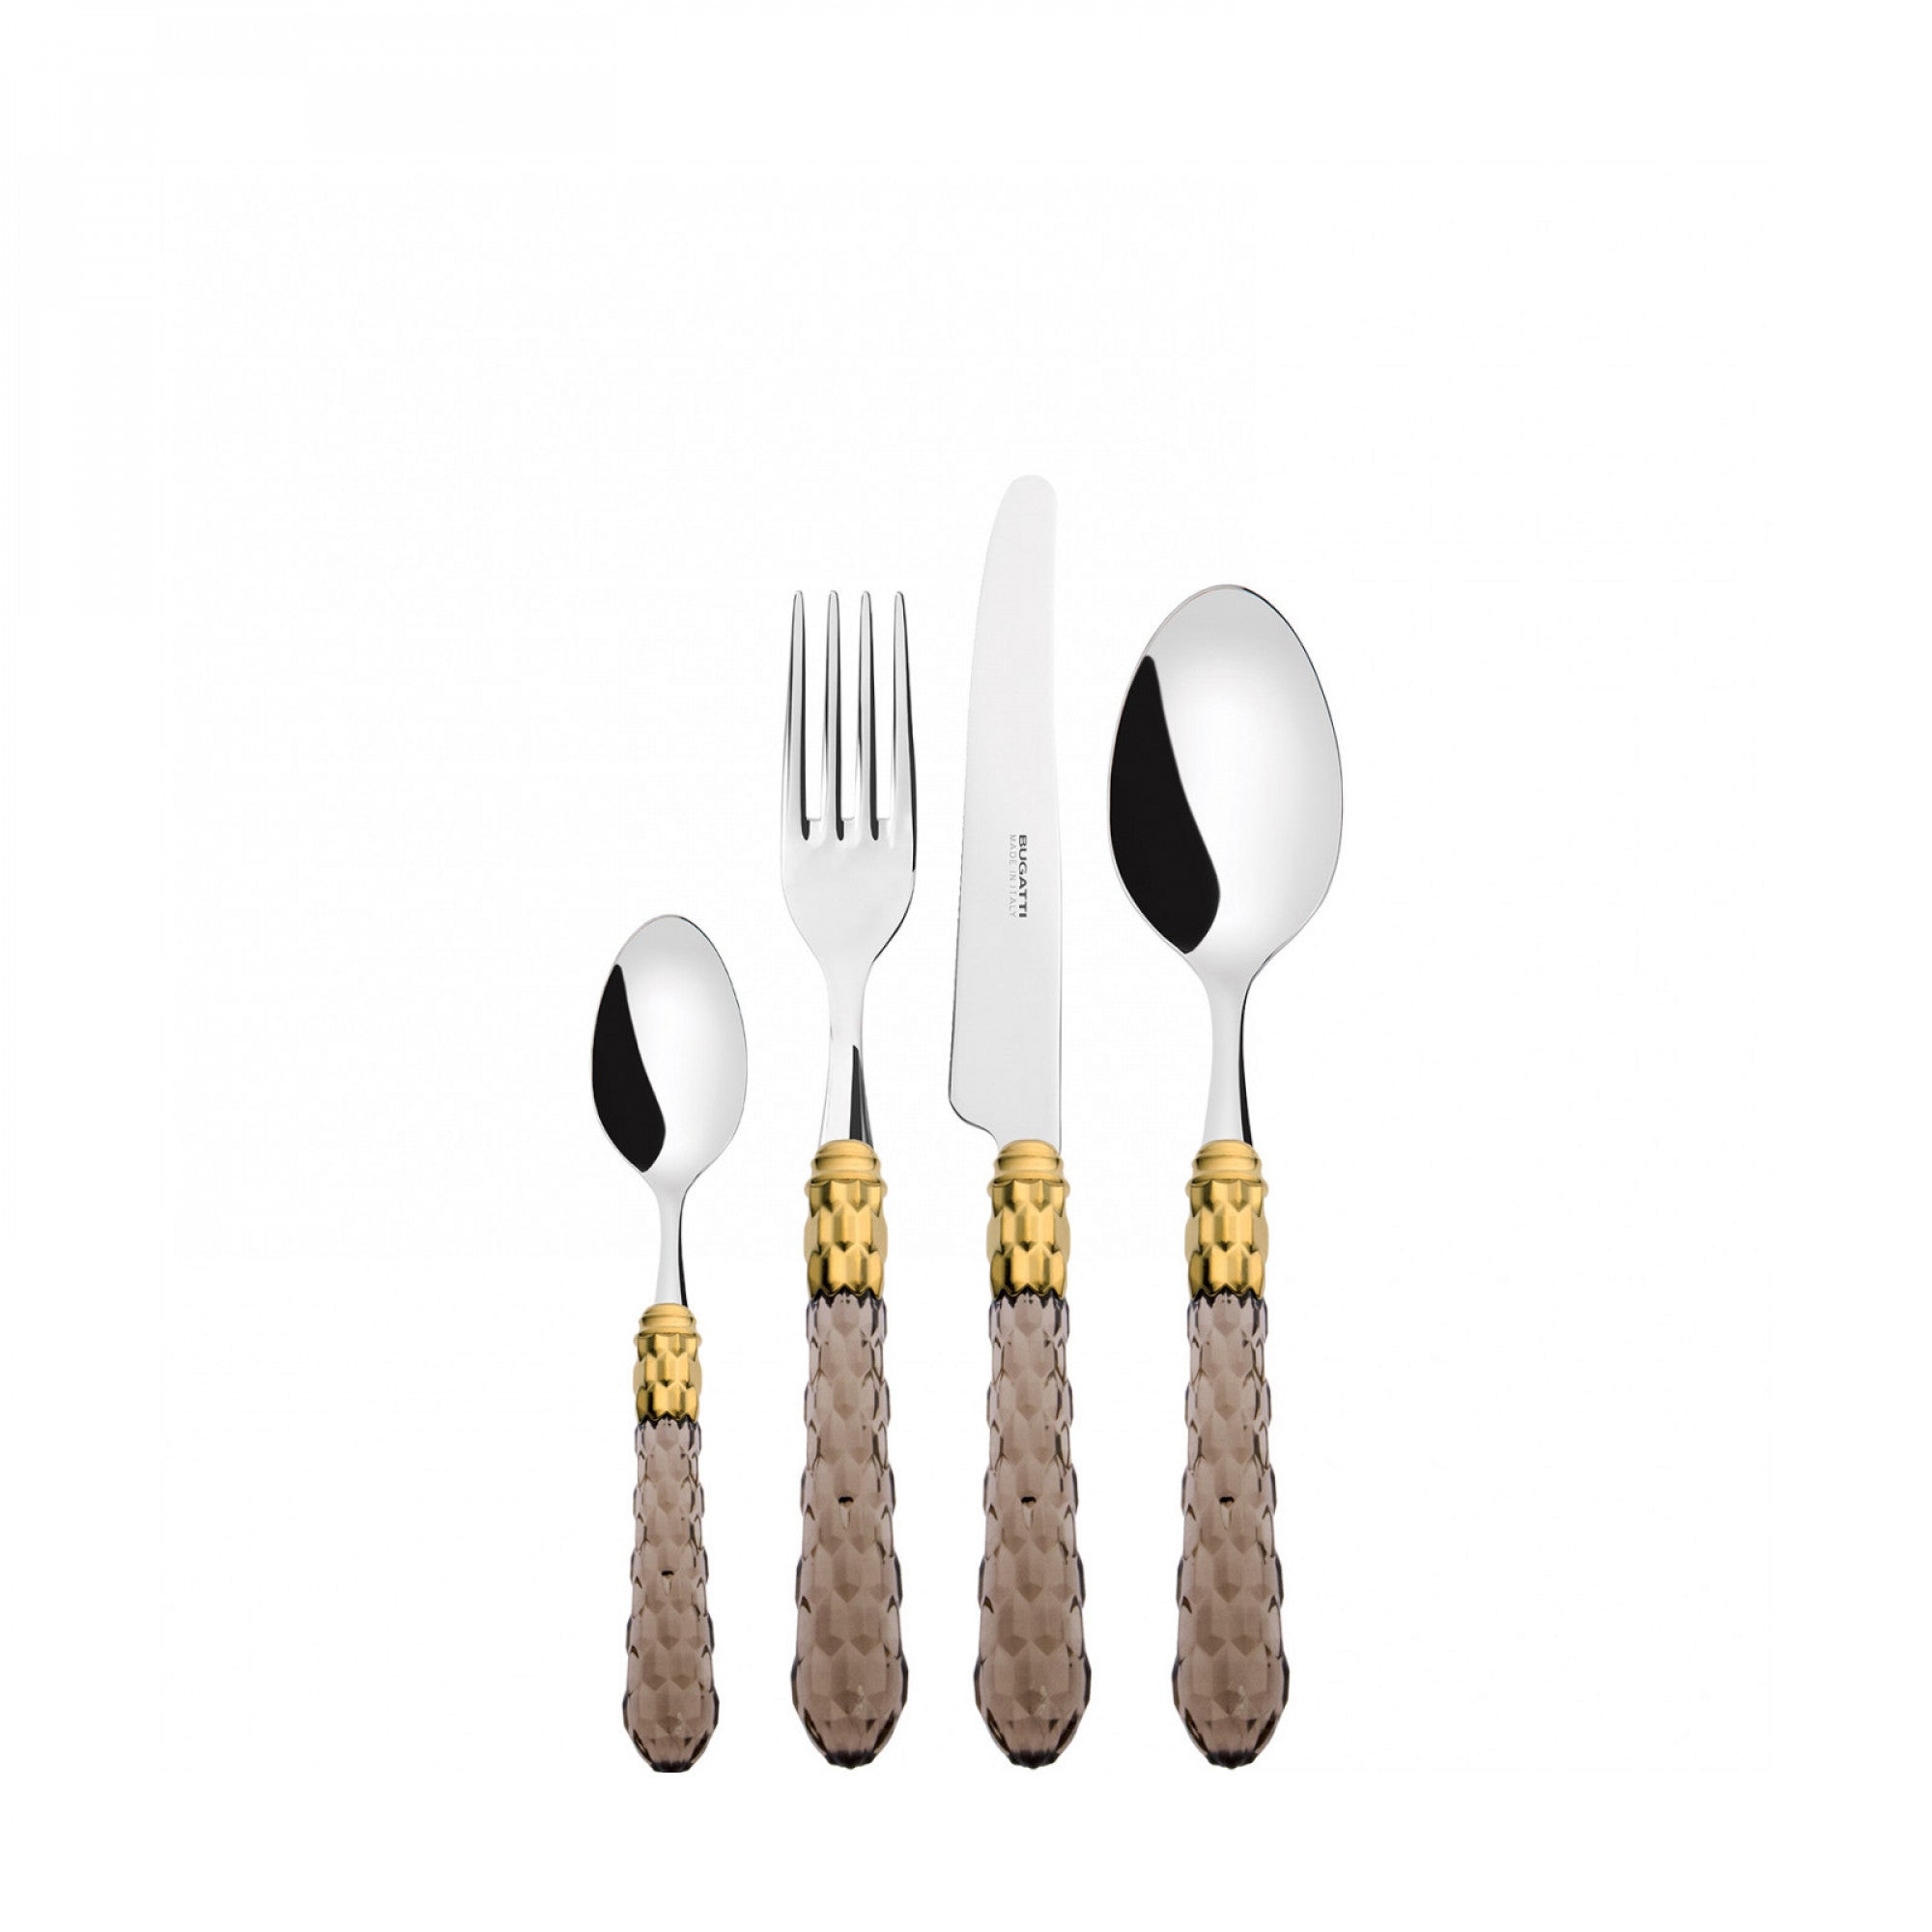 BUGATTI, Cristallo, 24-piece cutlery set in 18/10 stainless steel with golden ring. Packaged in a Compact lithographed box